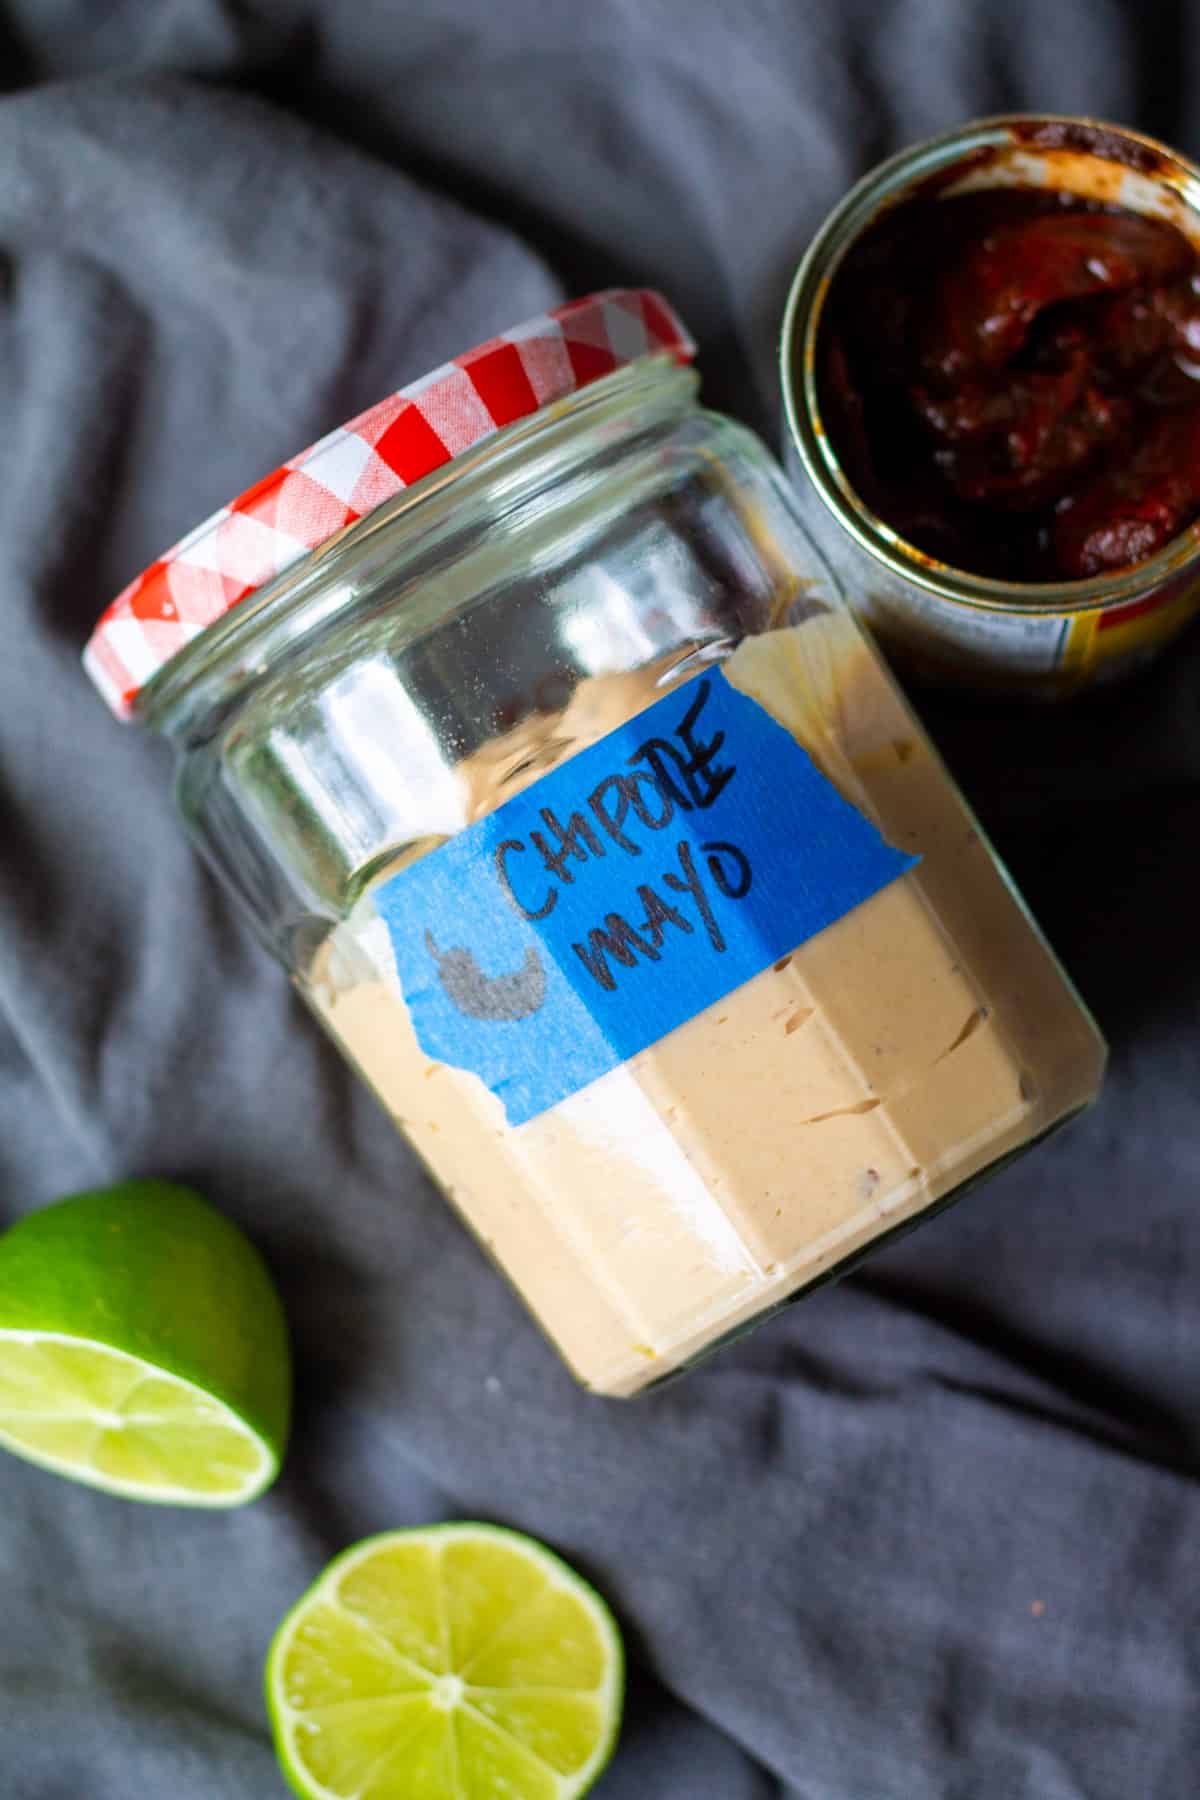 chipotle mayo in jar with red and white lid, next to can of chipotle peppers in adobo sauce, cut limes